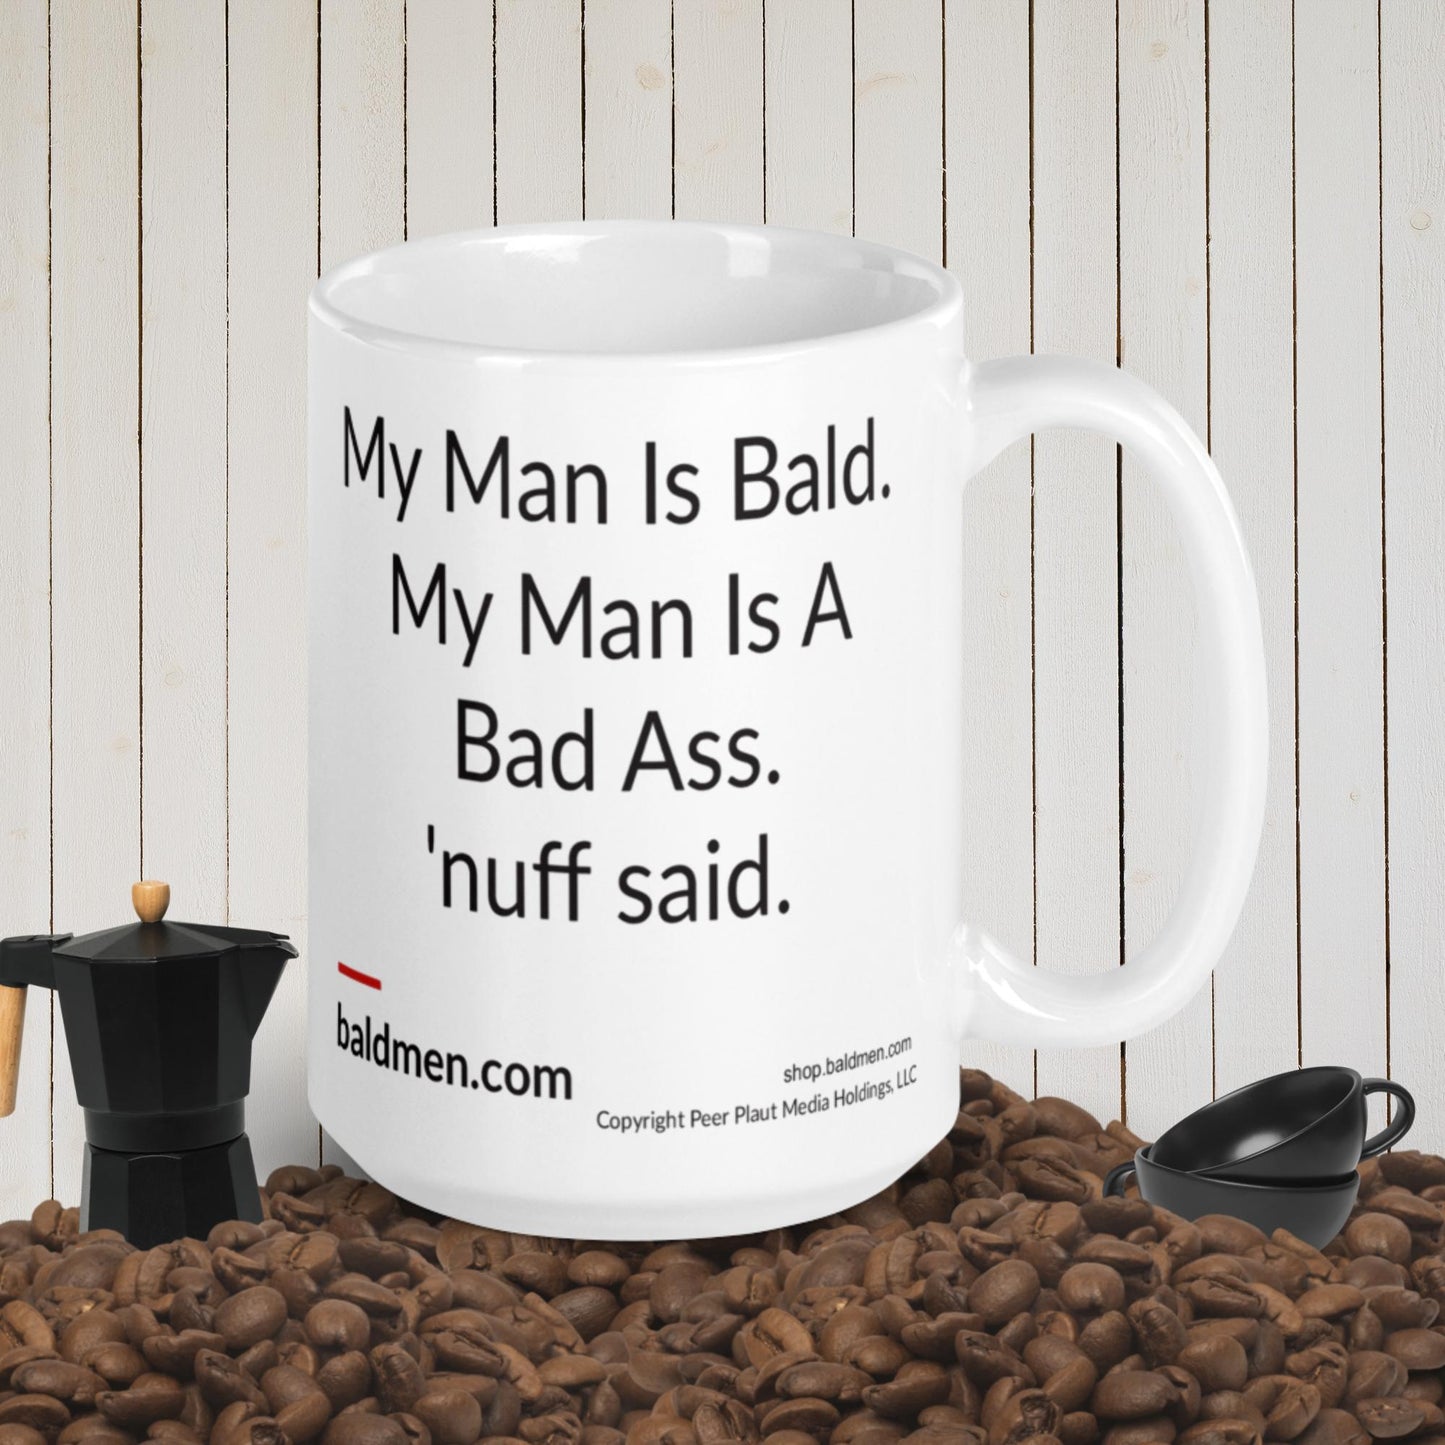 My man may be bald, but he's a total badass - celebrate with our mug.